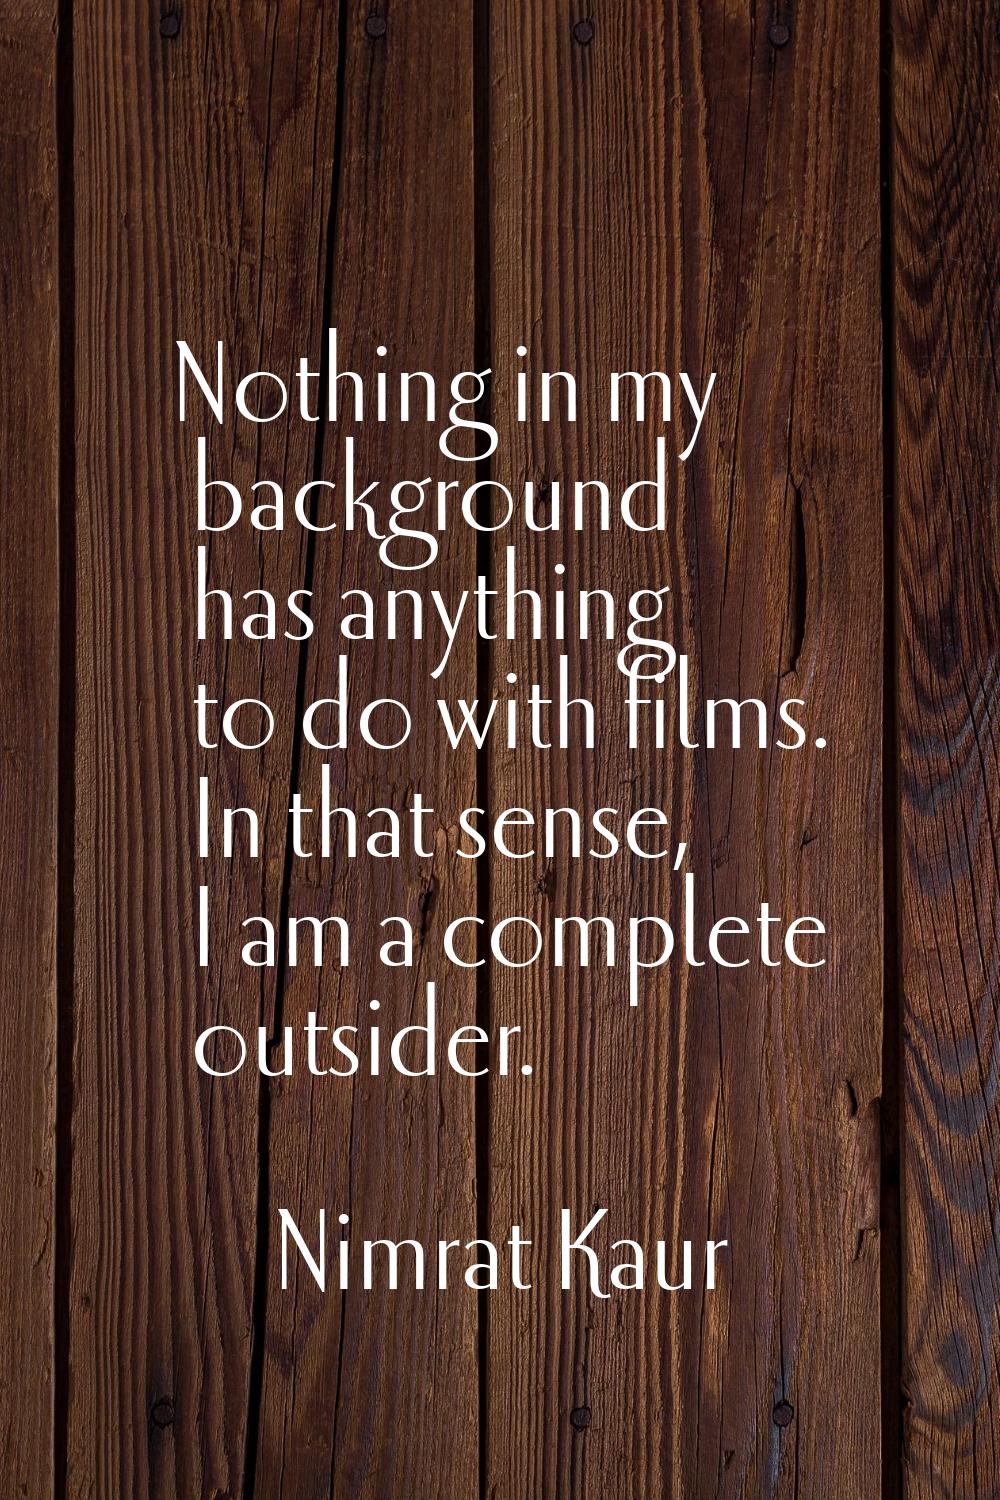 Nothing in my background has anything to do with films. In that sense, I am a complete outsider.